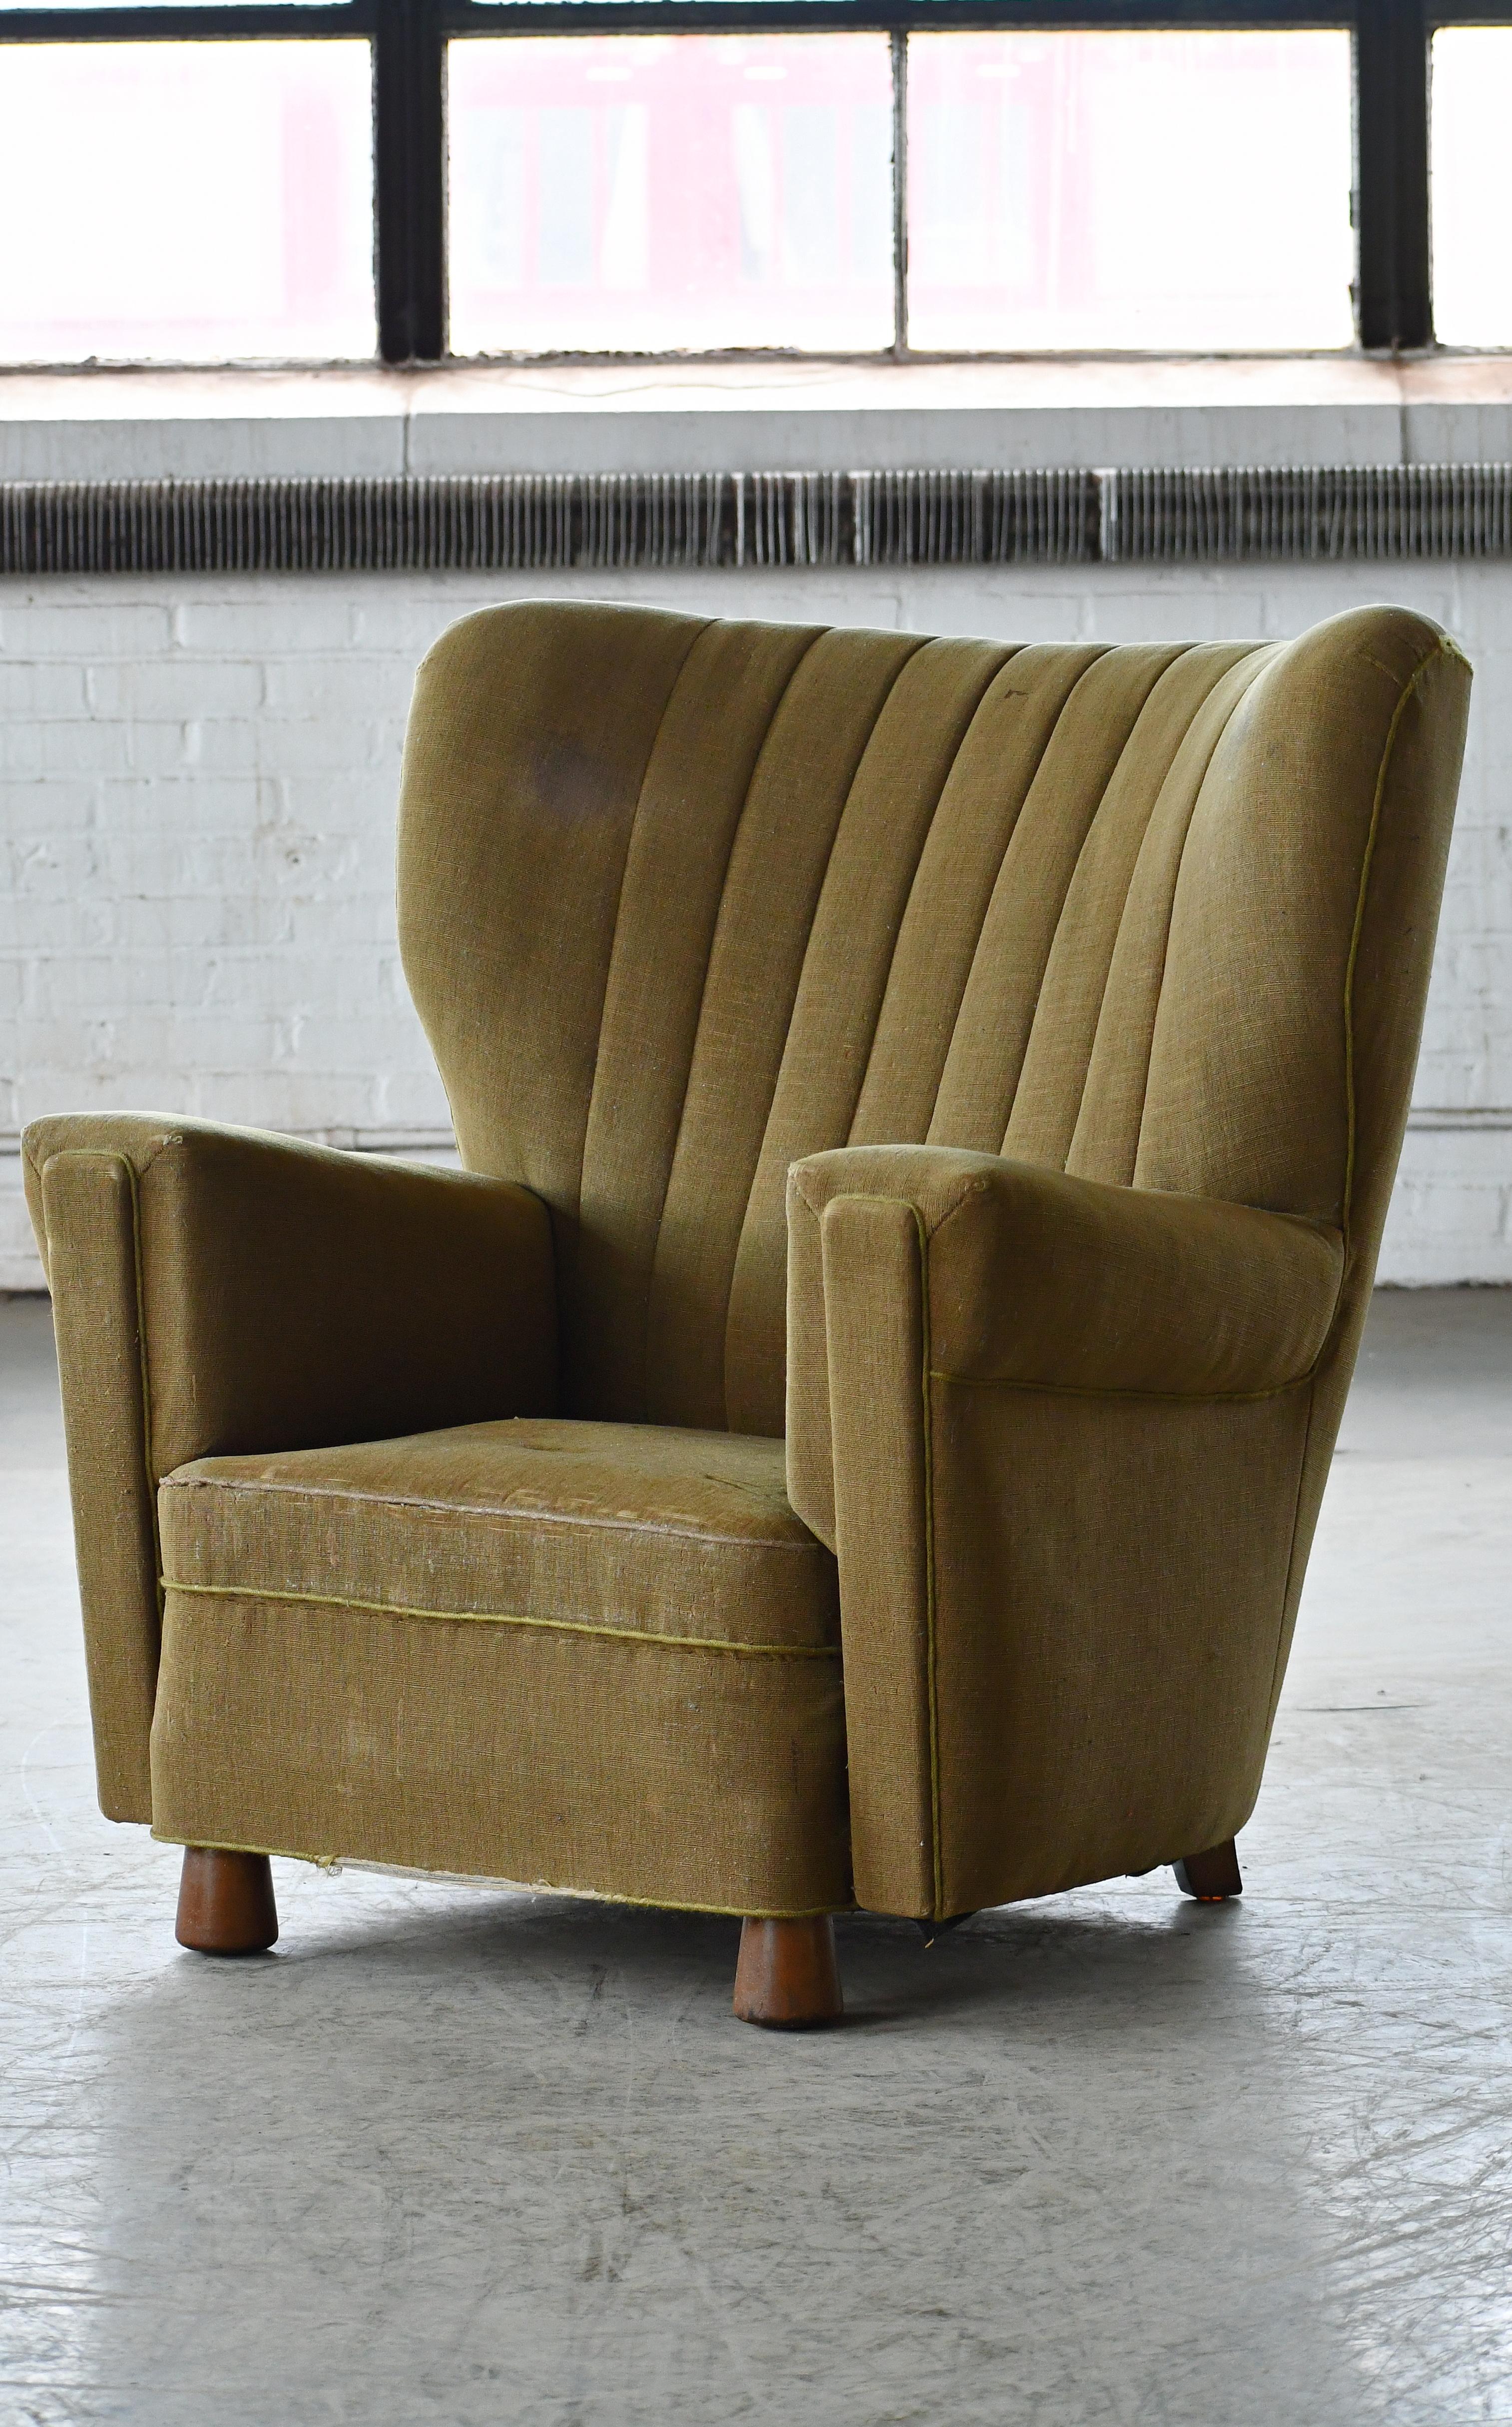 Incredibly comfortable, exuberantly designed large lounge chair. The style is very much that of Otto Færge and true to his style and design proportions that perfectly captures the essence of 1940s Danish design coming out of the Art Deco era and